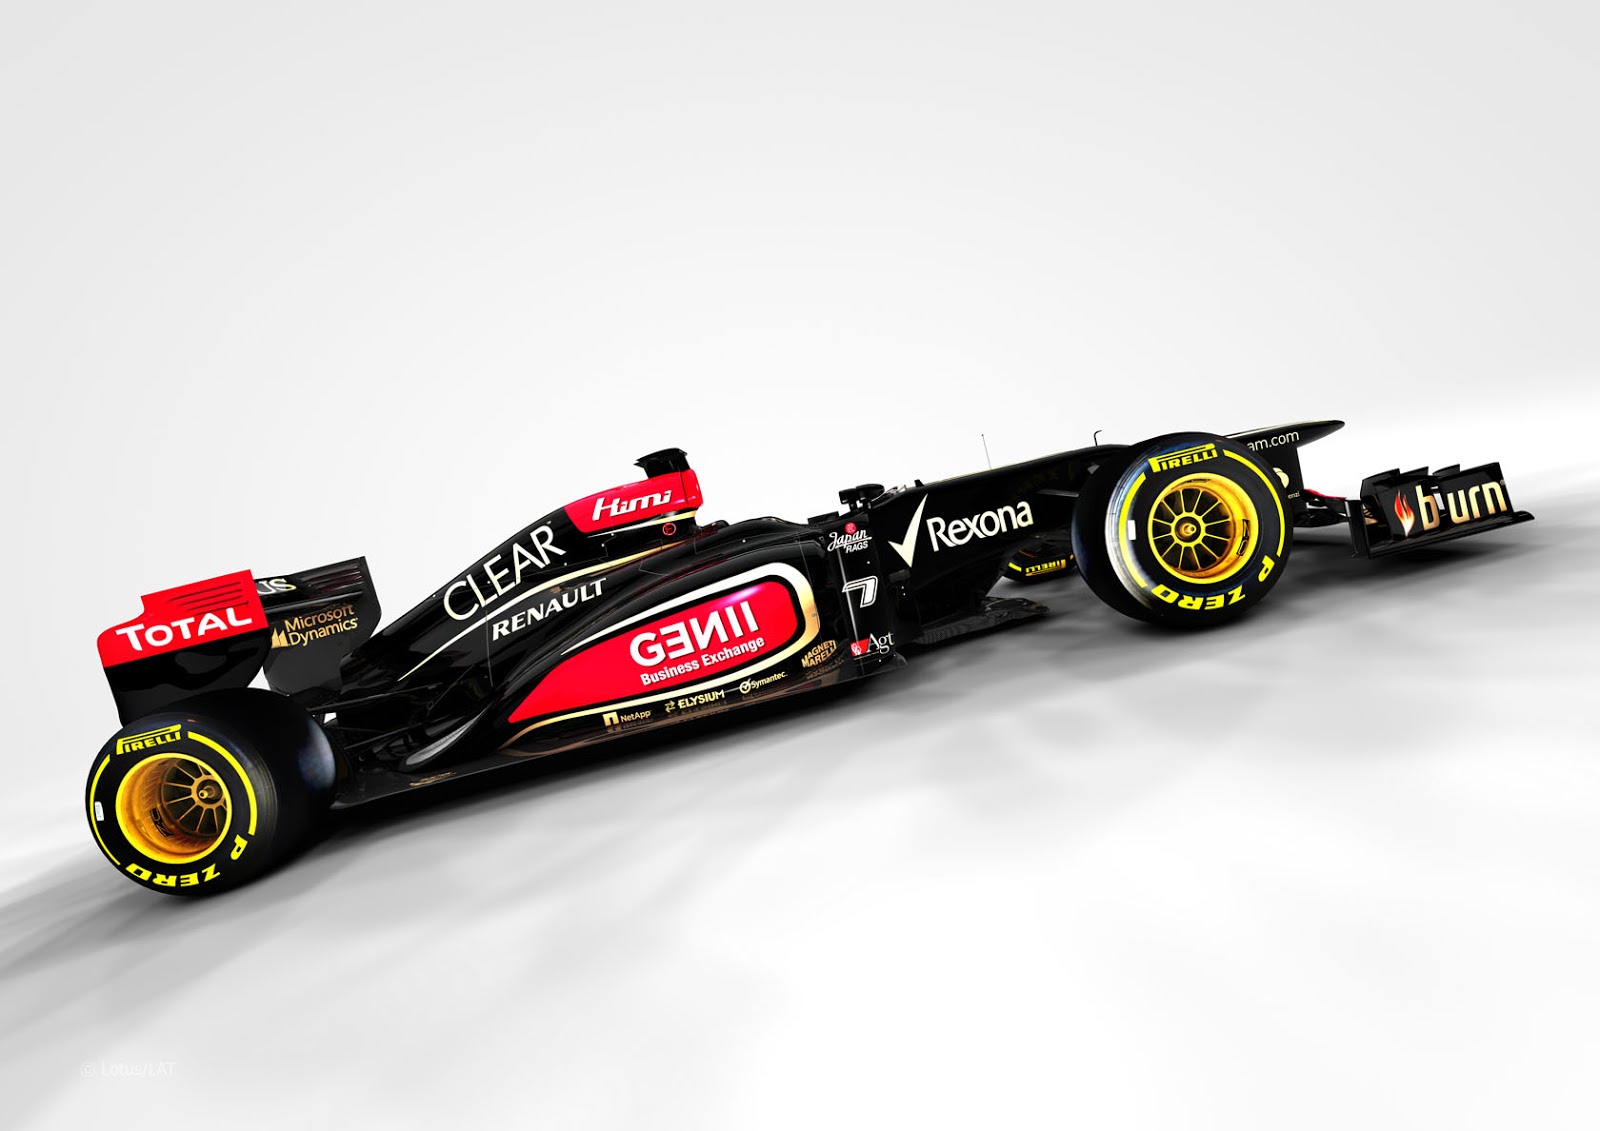 ... Lotus E21 F1 car, the Lotus F1 team is all set for the upcoming 2013